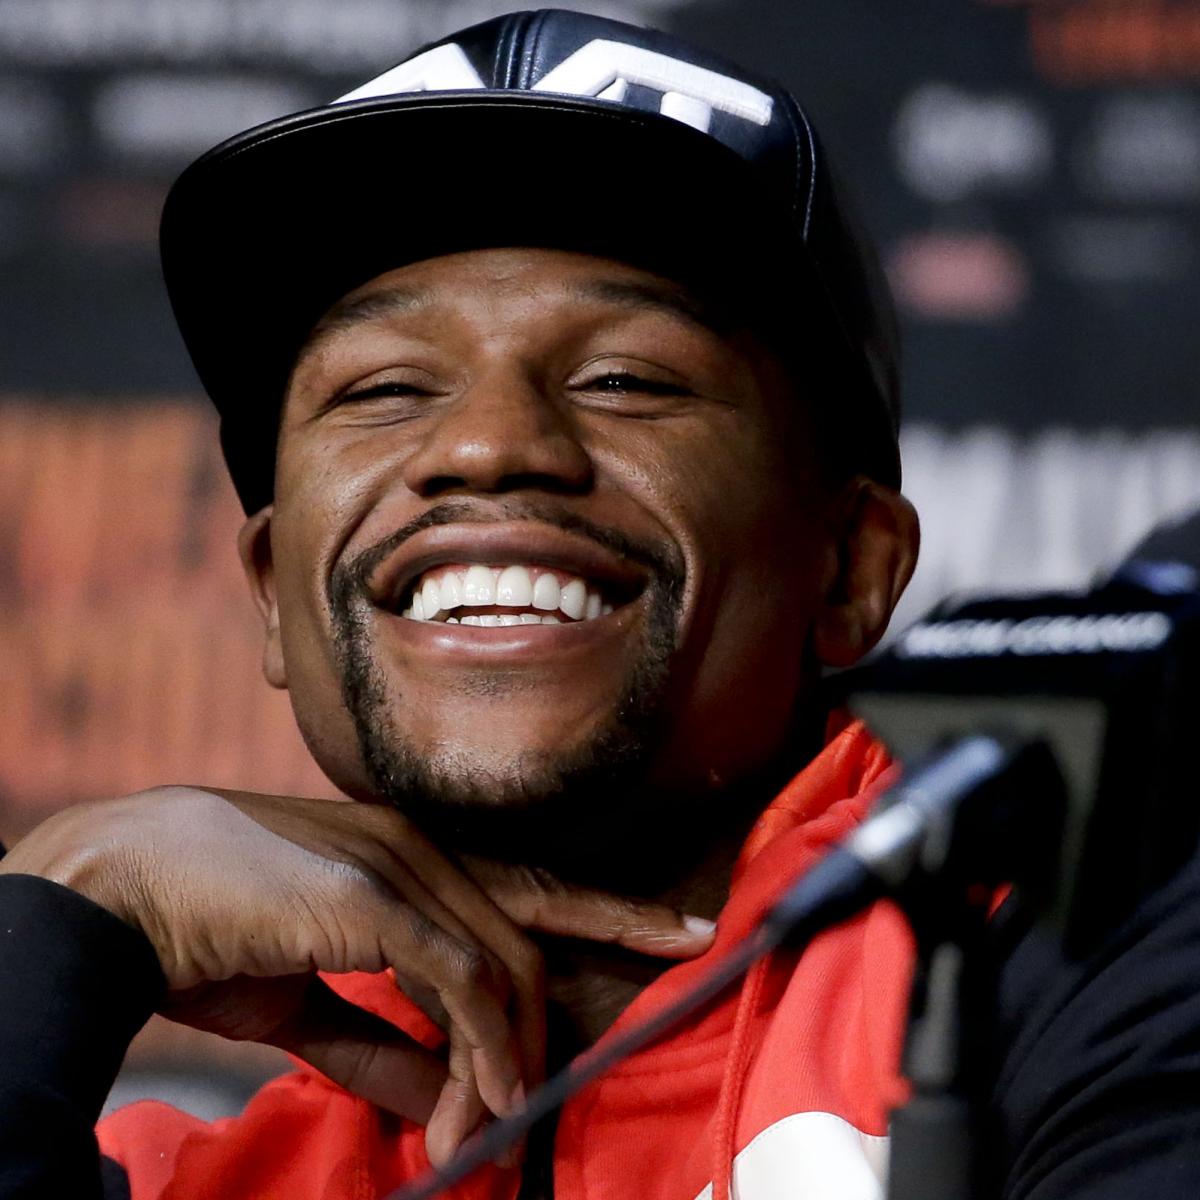 Floyd Mayweather Jr. vs. Conor McGregor Boxing Betting Lines, Prop Odds, Preview ...